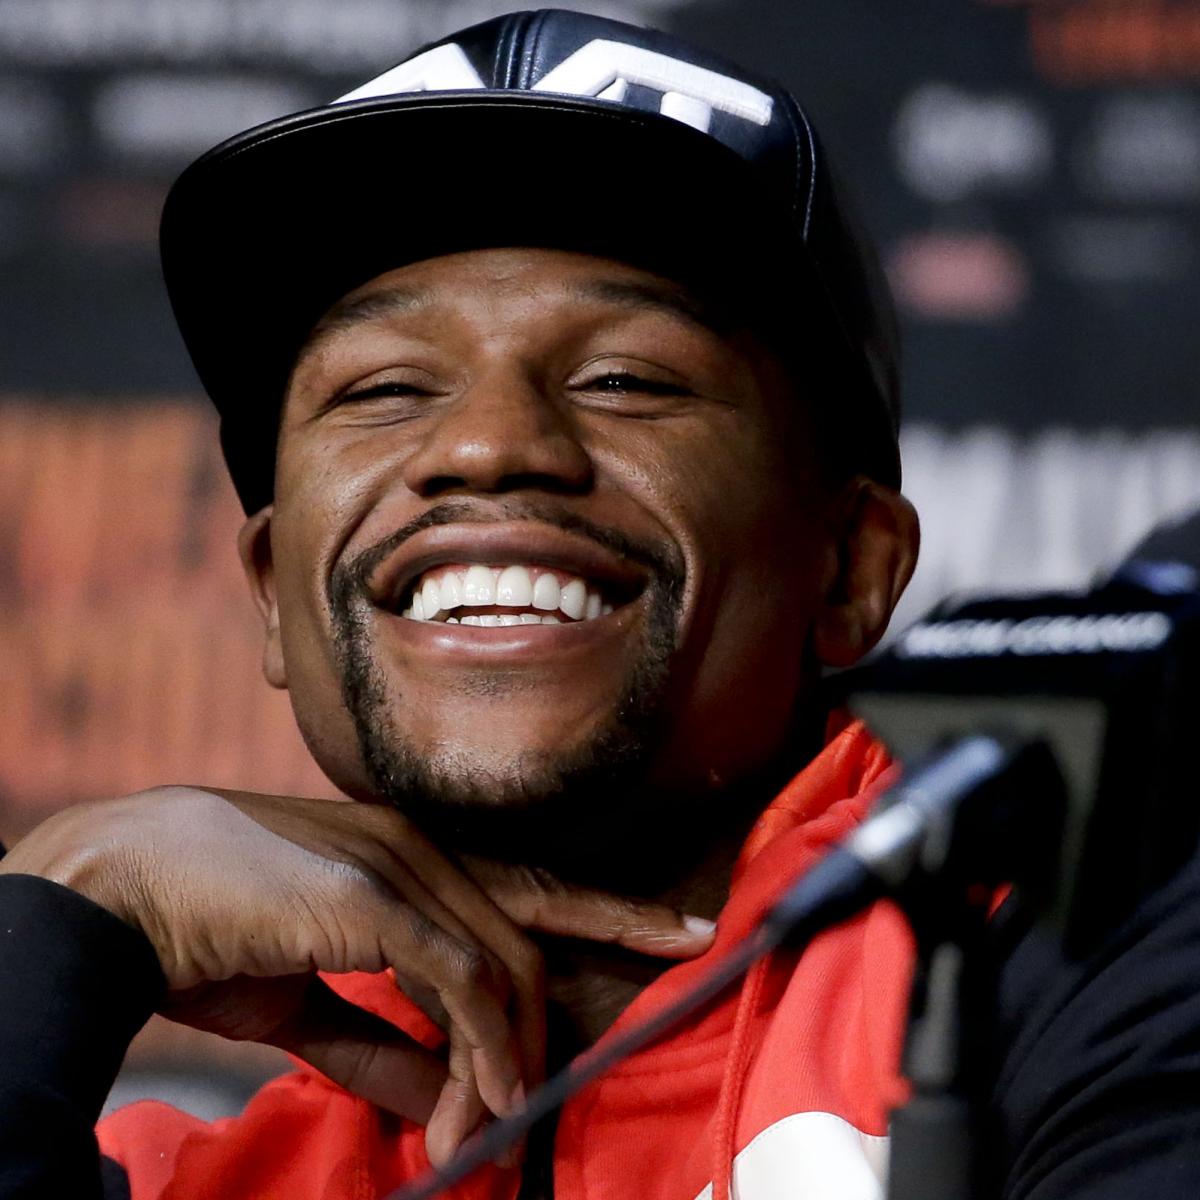 Floyd Mayweather Jr. vs. Conor McGregor Boxing Betting Lines, Prop Odds, Preview ...